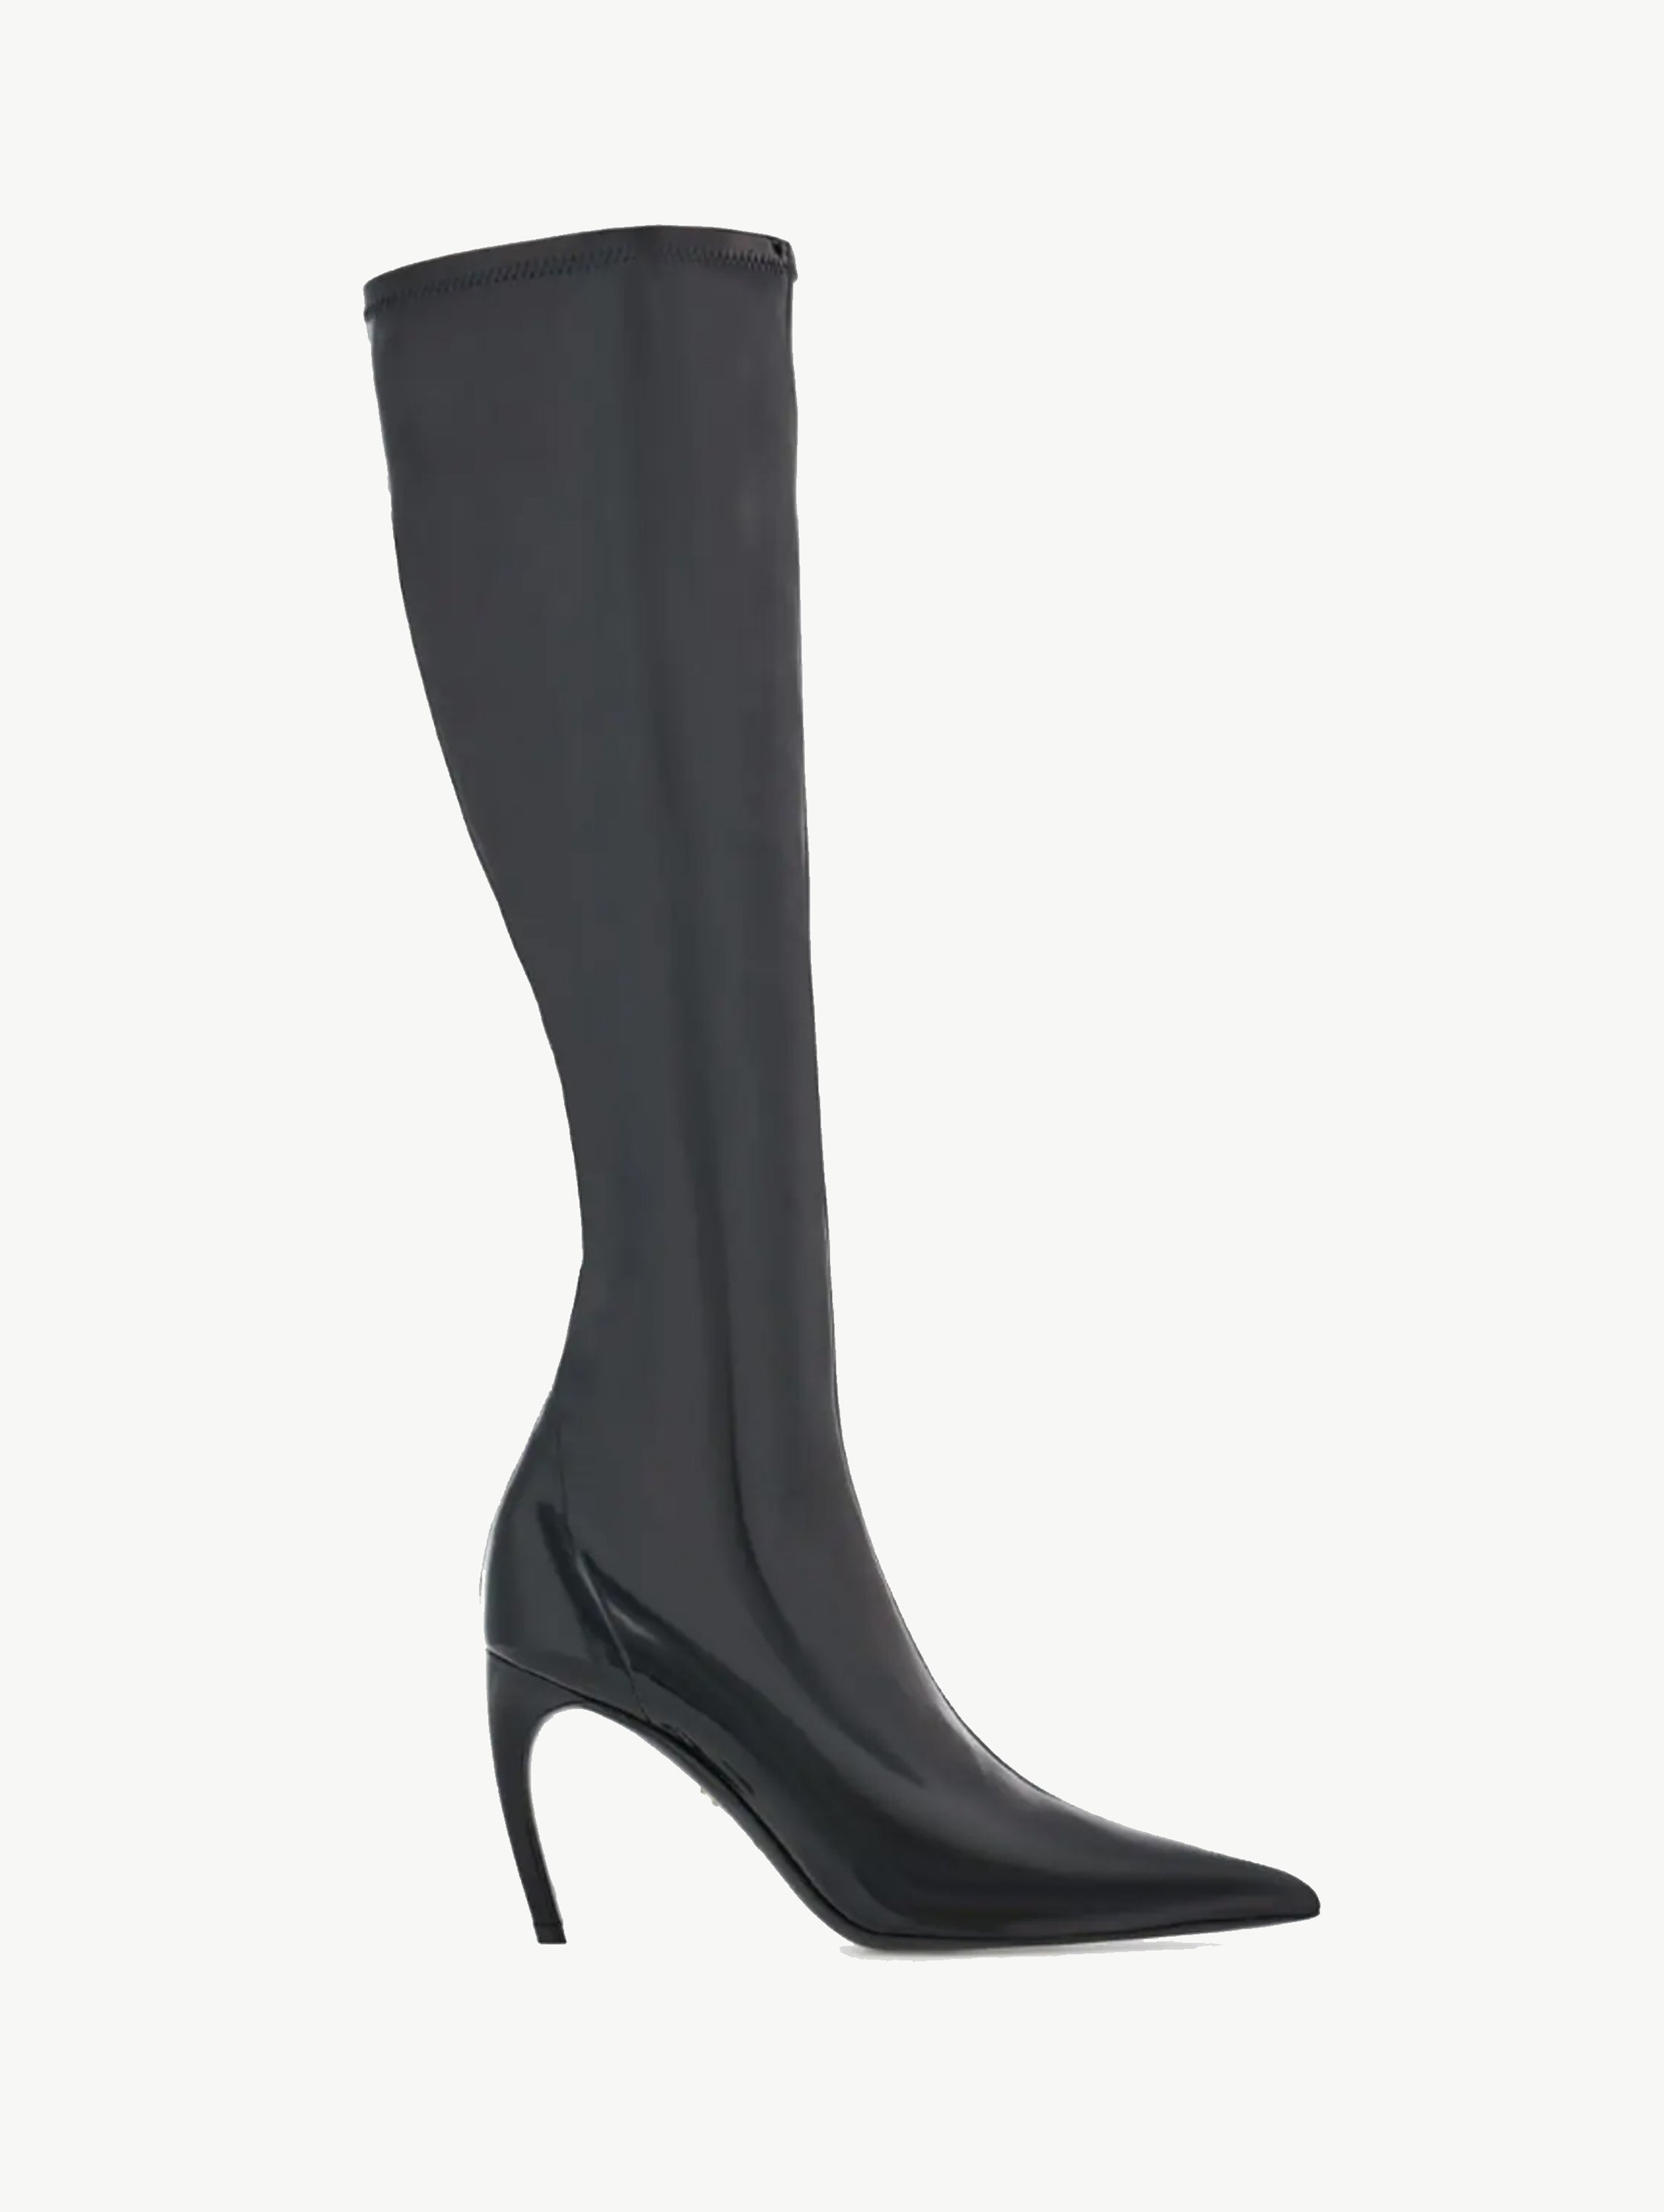 Bri patent leather knee boots